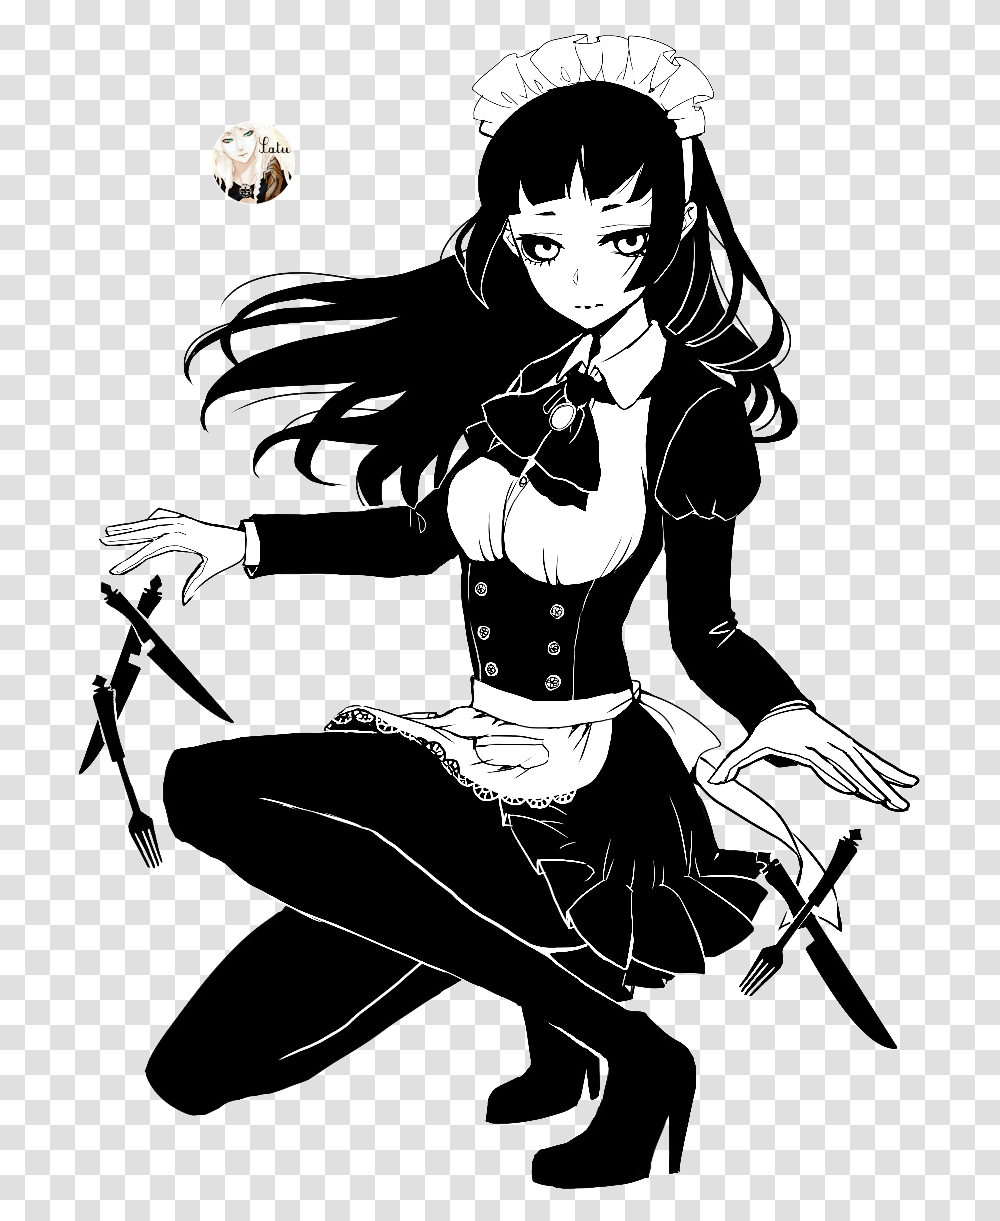 Download Anime Girl Black And White Anime Black And White Anime Girl, Manga, Comics, Book, Person Transparent Png